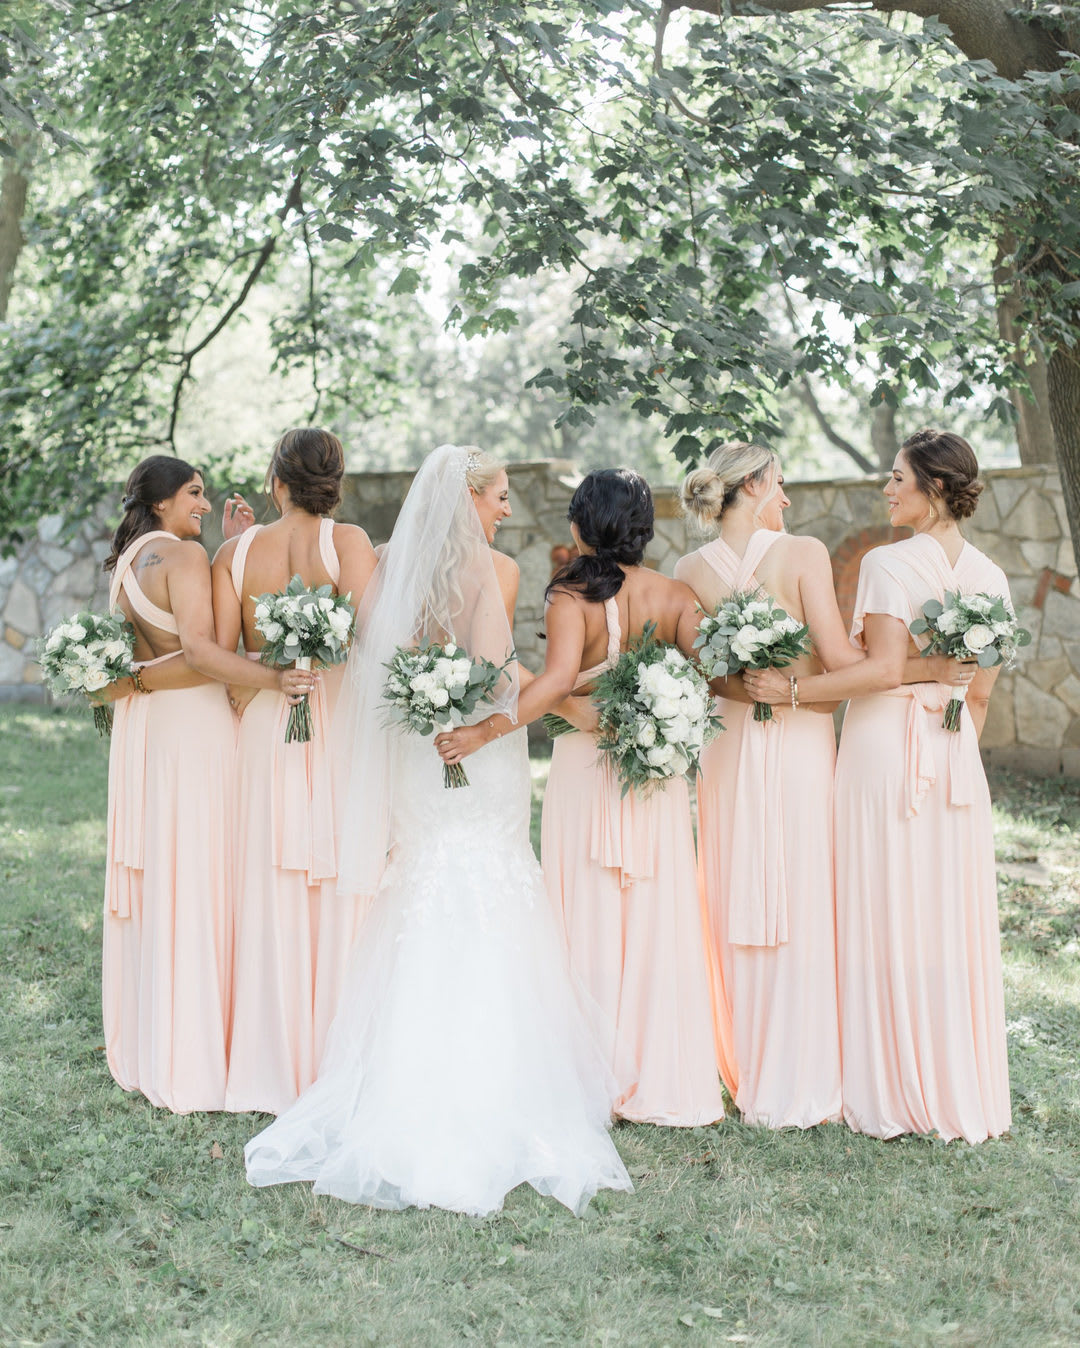 The Ultimate Guide To Bridesmaid Dress Styles - Lulus.com Fashion Blog